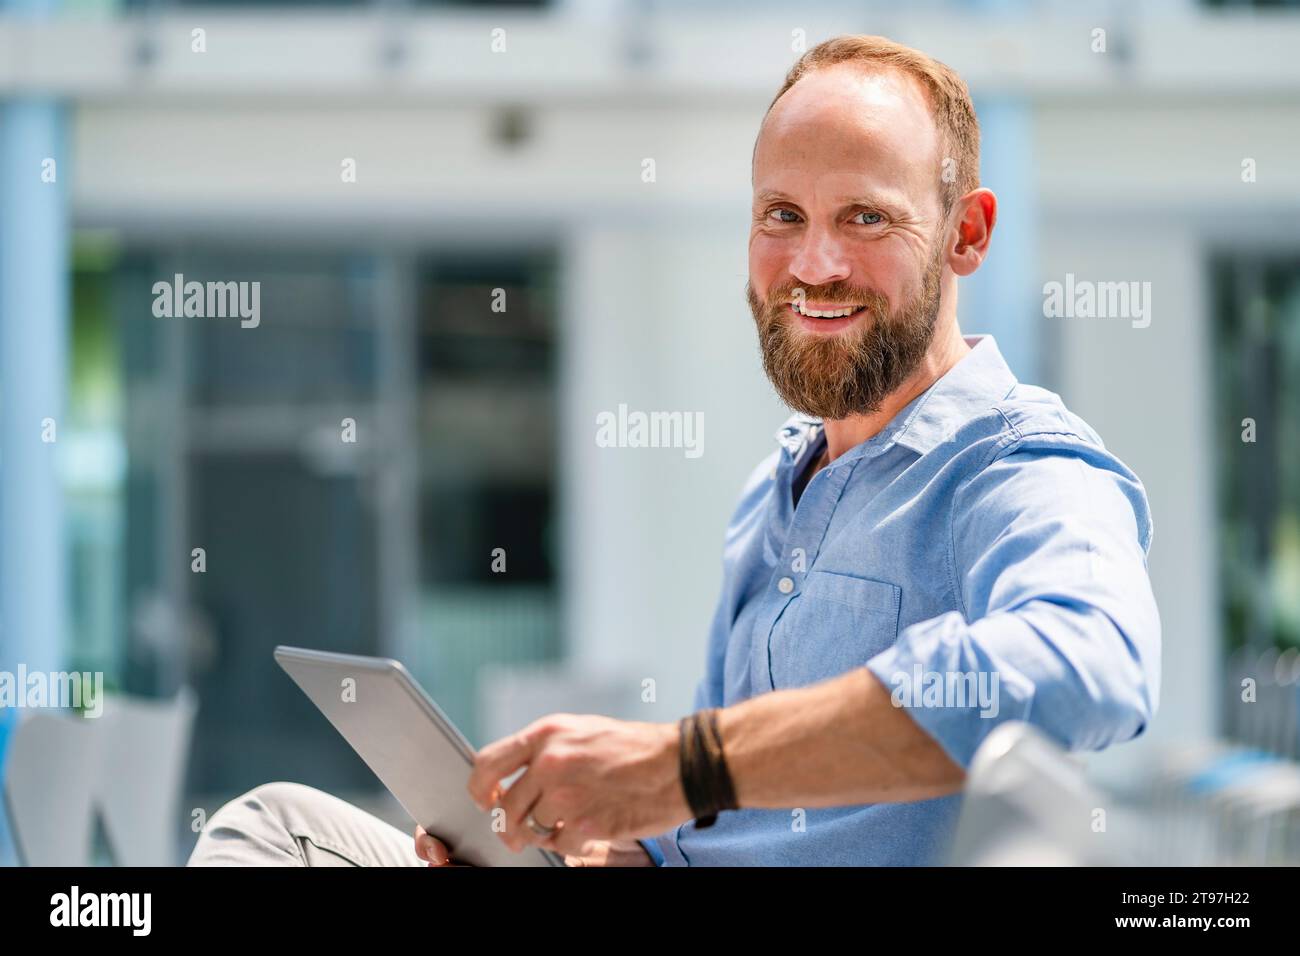 Businessman sitting in company auditory using digital tablet Stock Photo